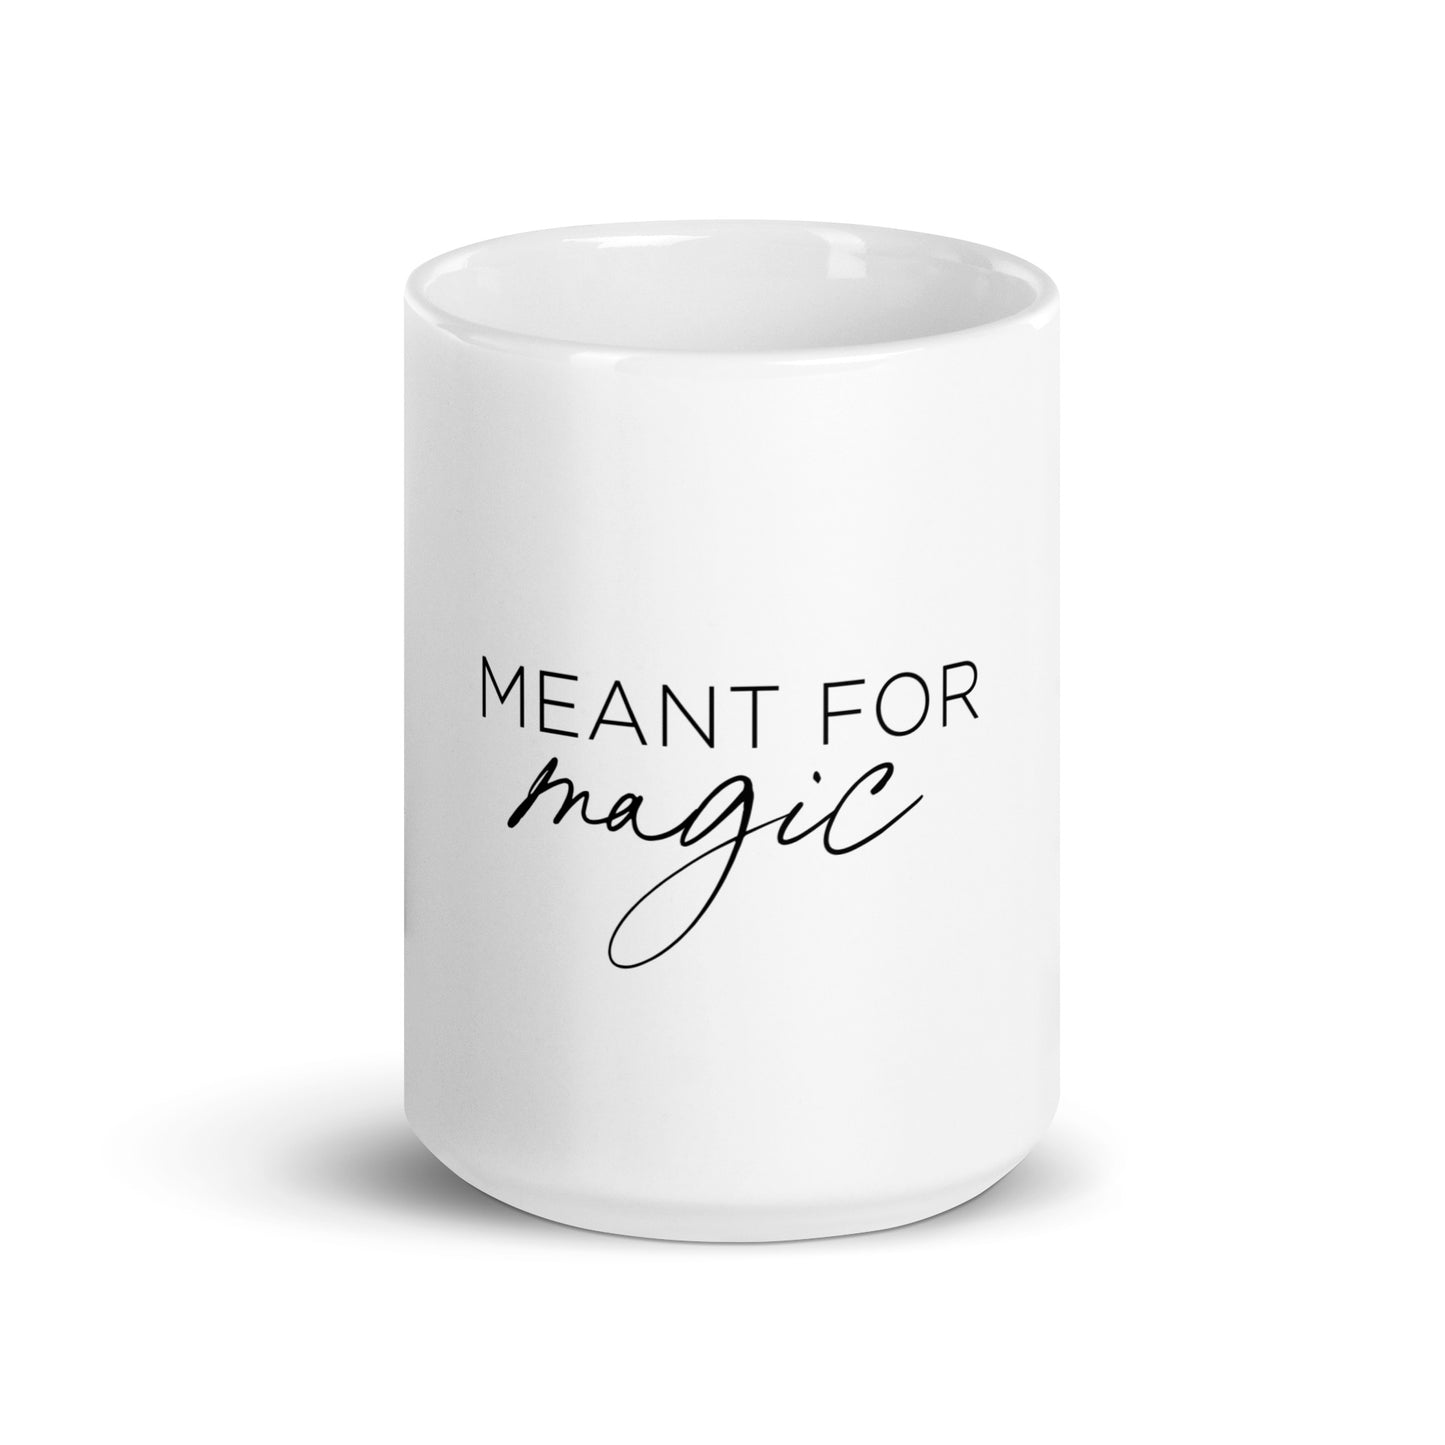 The Meant for Magic - White glossy mug